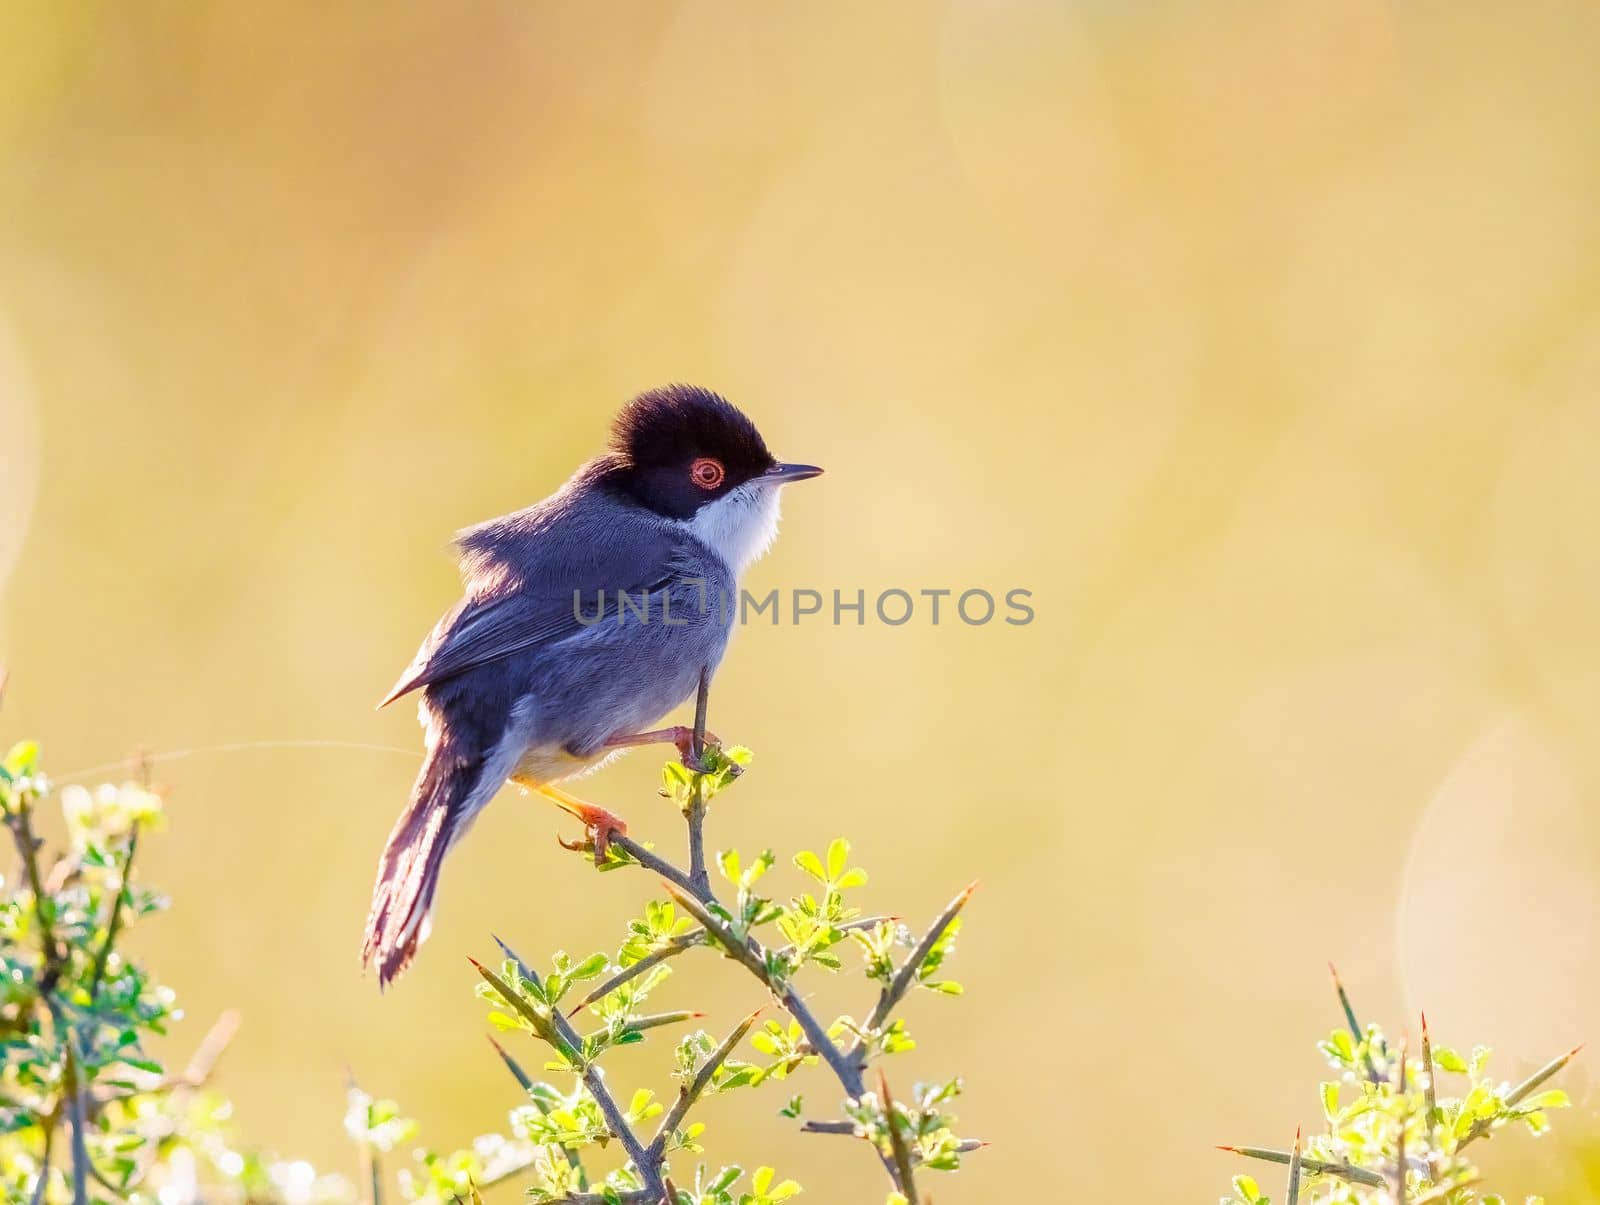 Sardianian Warbler perched on a bush during sunrise by Rajh_Photography